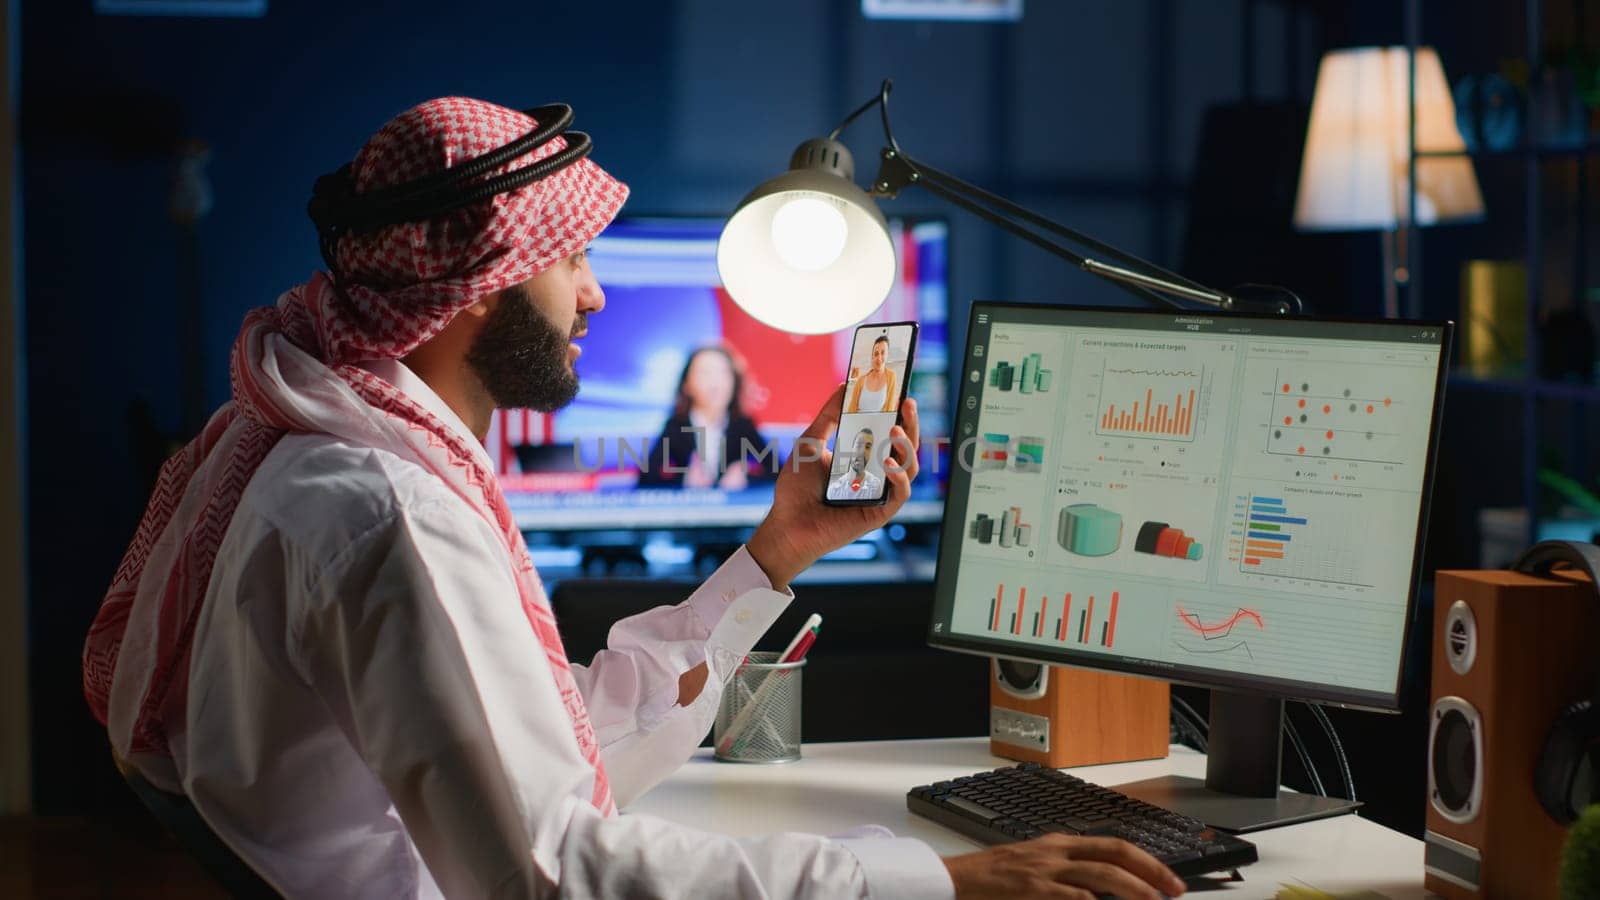 Muslim teleworker and coworkers in call crosschecking analytics statistical data sets in dimly lit apartment office. Arab employee optimizing key performance indicators with colleagues in videocall